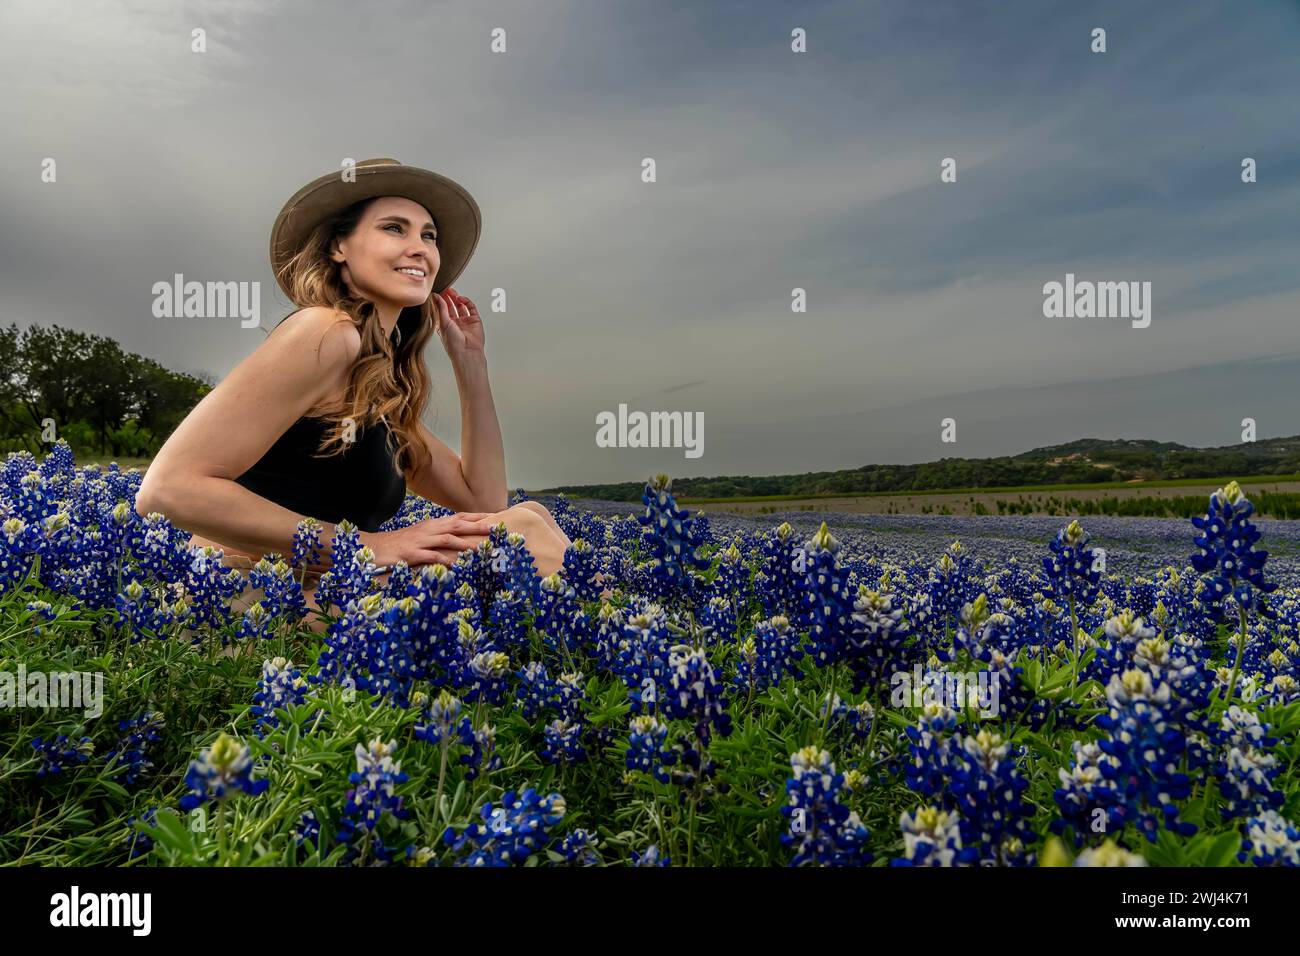 A Lovely Brunette Model Poses In A Field Of Bluebonnet Flowers In A Texas Prarie Stock Photo